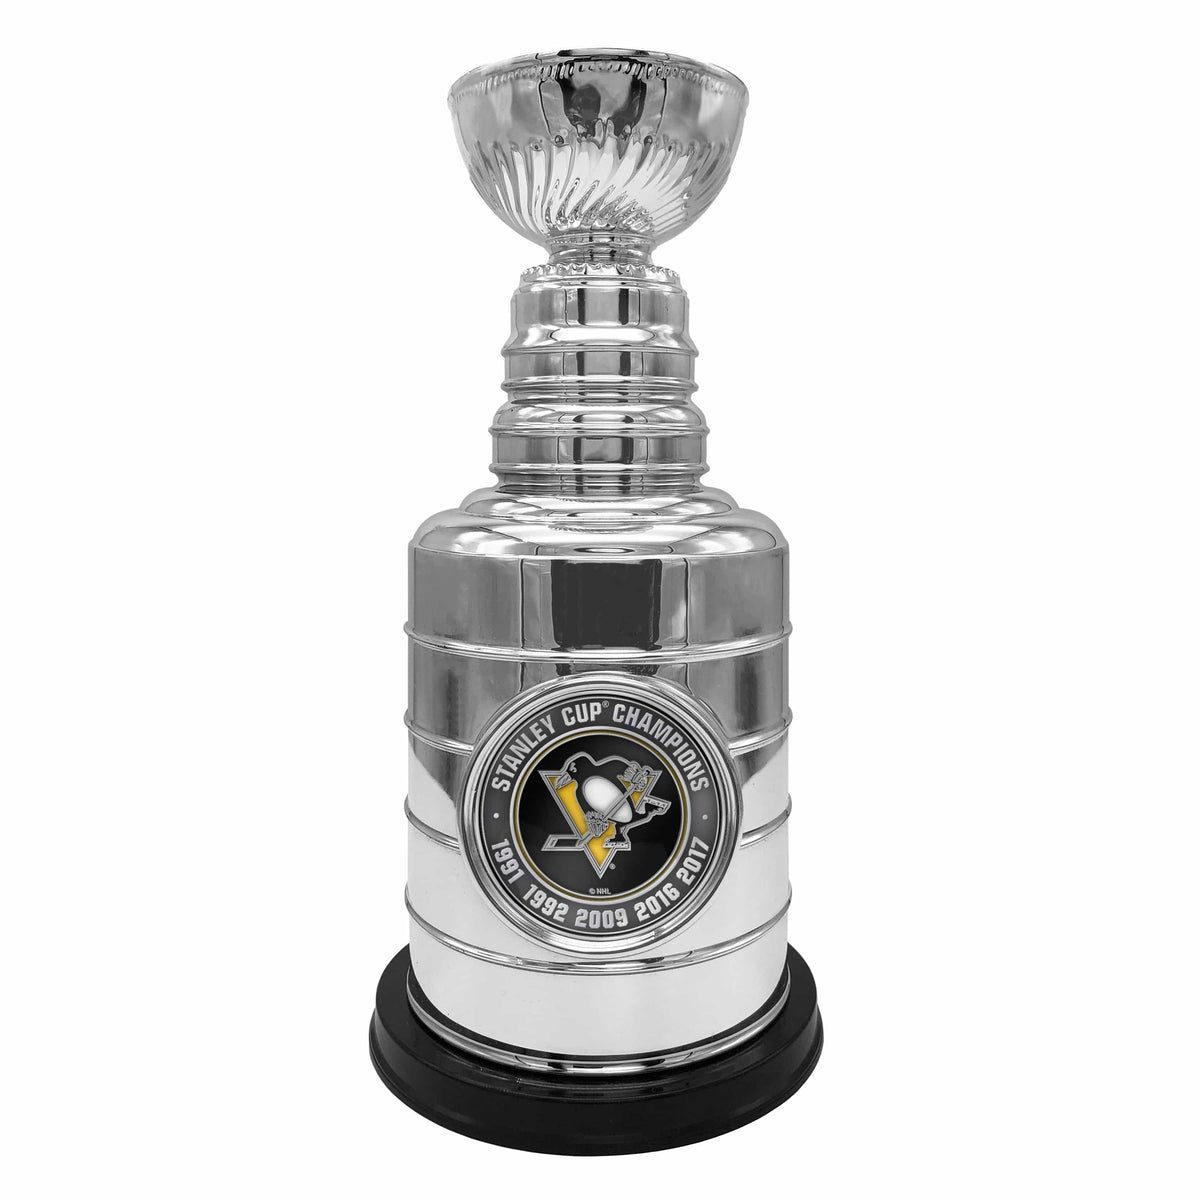 Pittsburgh Penguins Legacy Stanley Cup Champions 8 Glass Replica